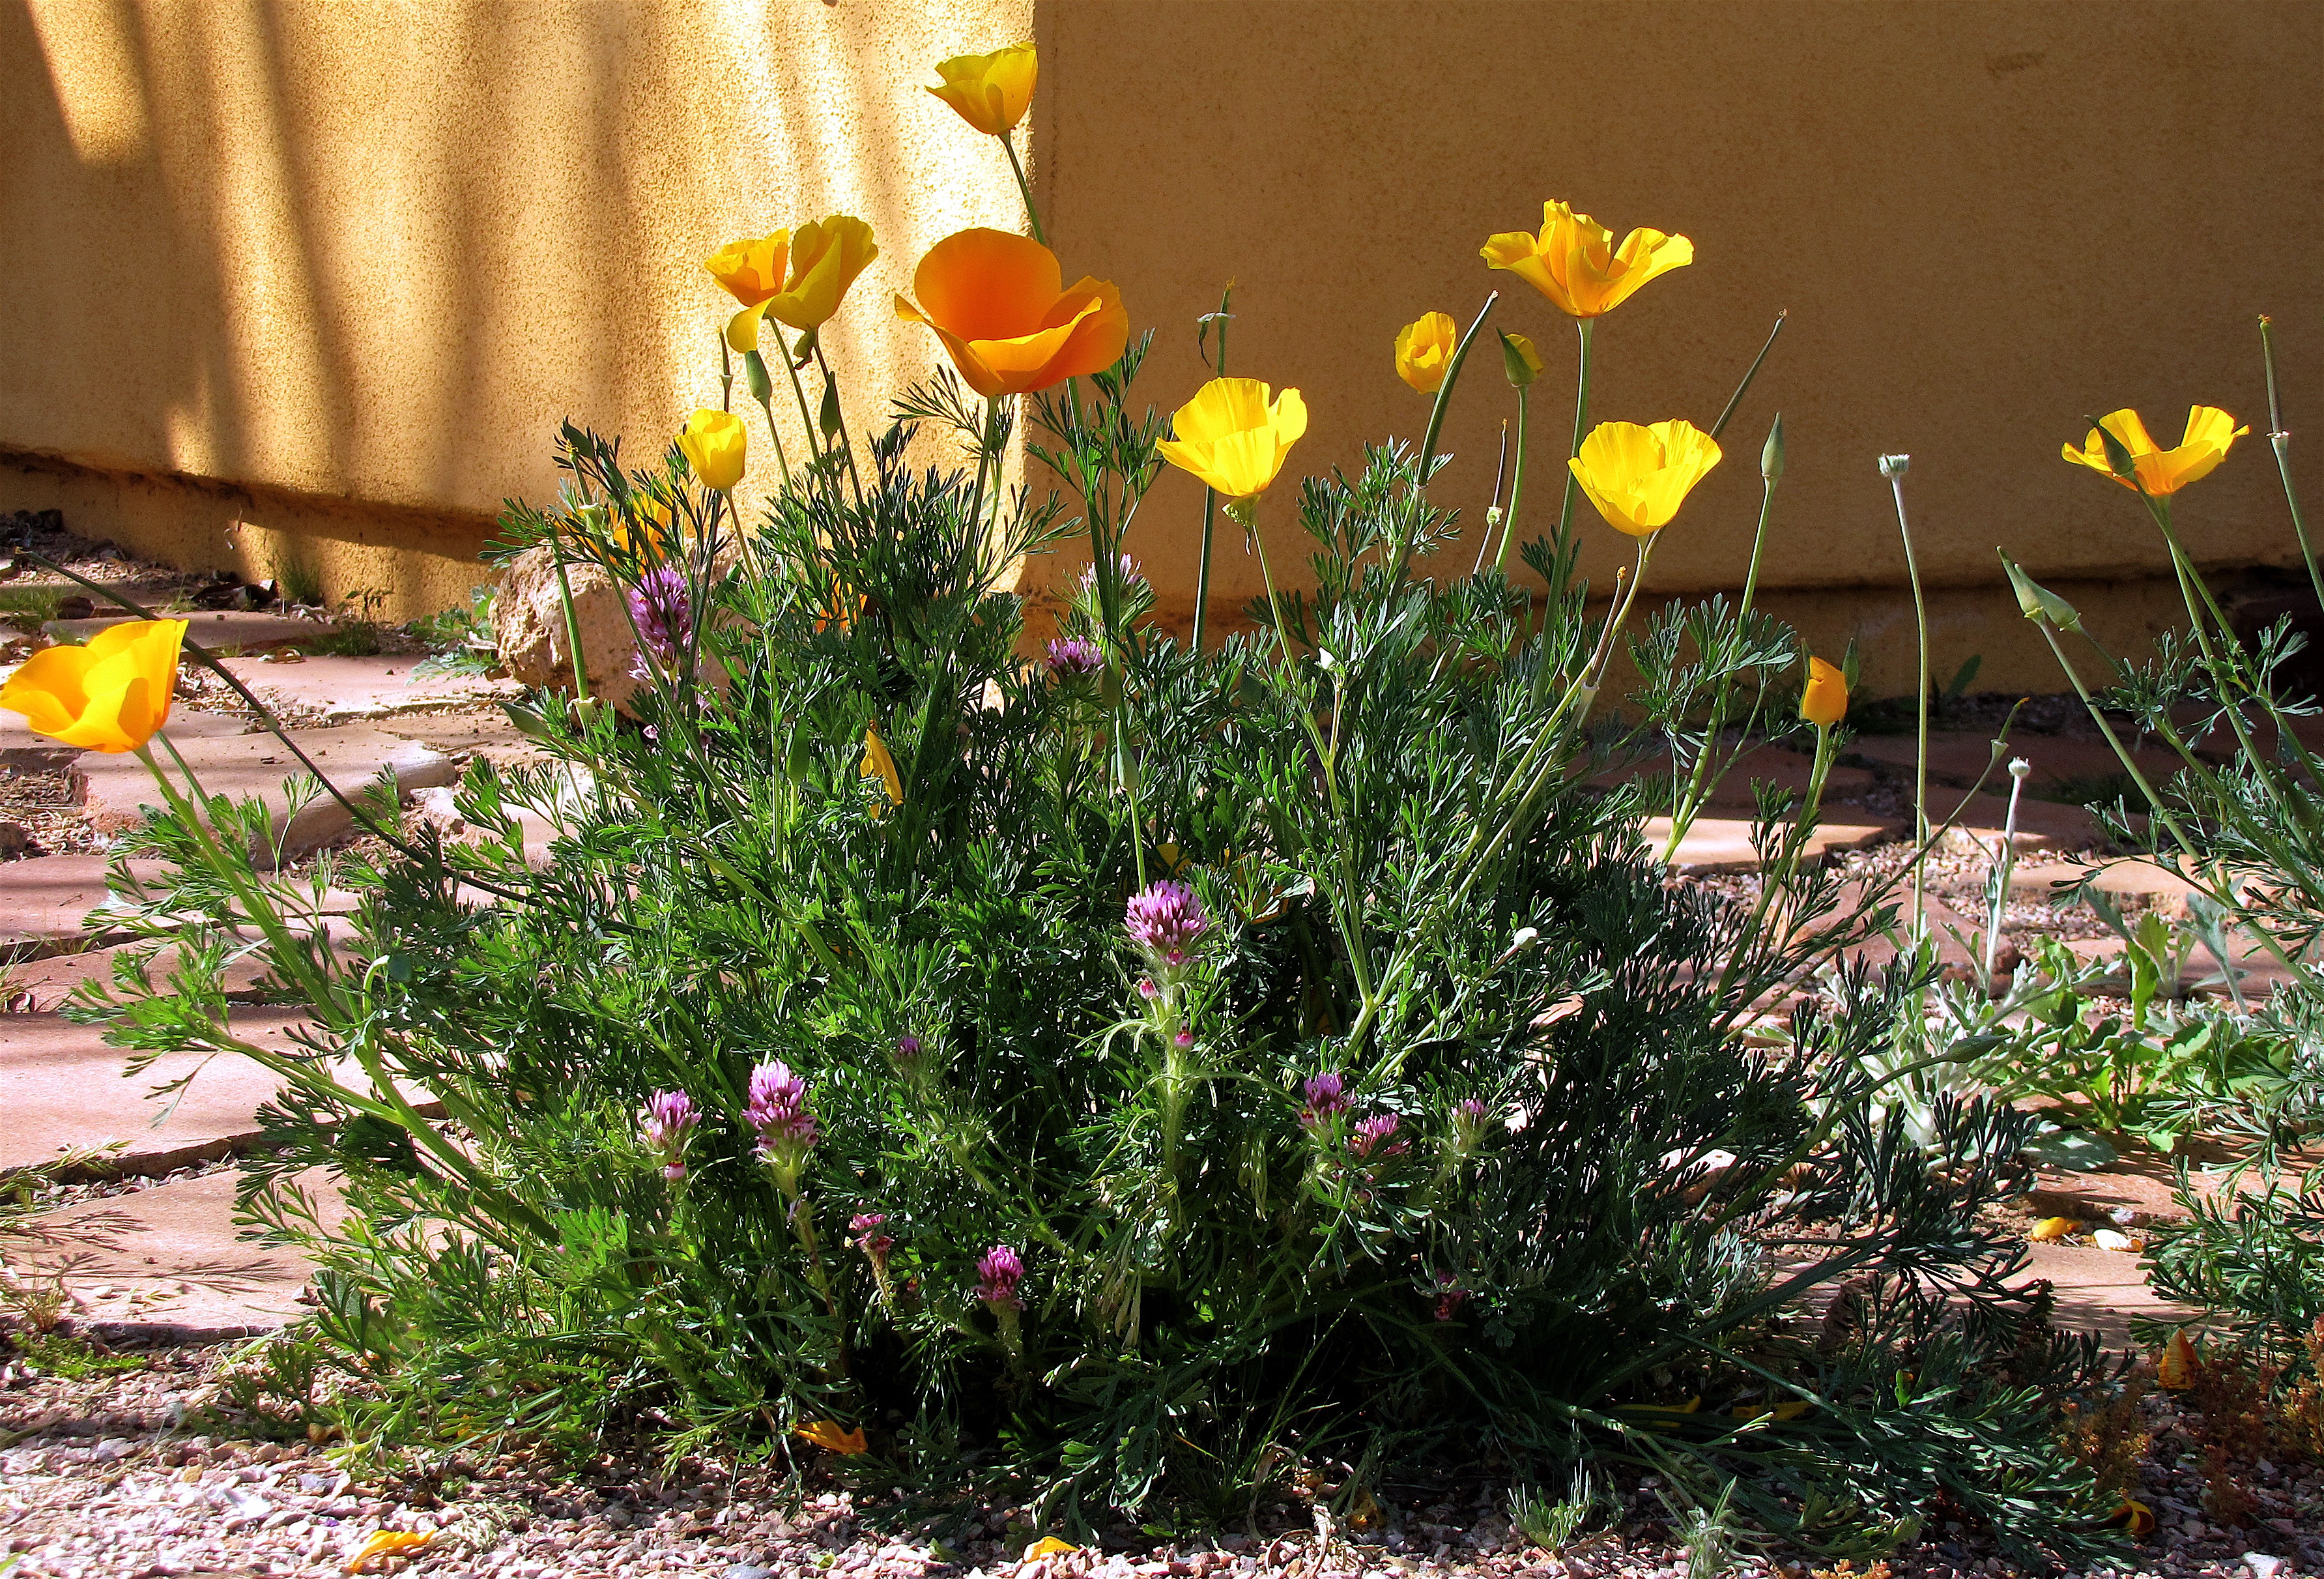 PLANT OF THE MONTH: WILDFLOWERS! - Water Use It Wisely